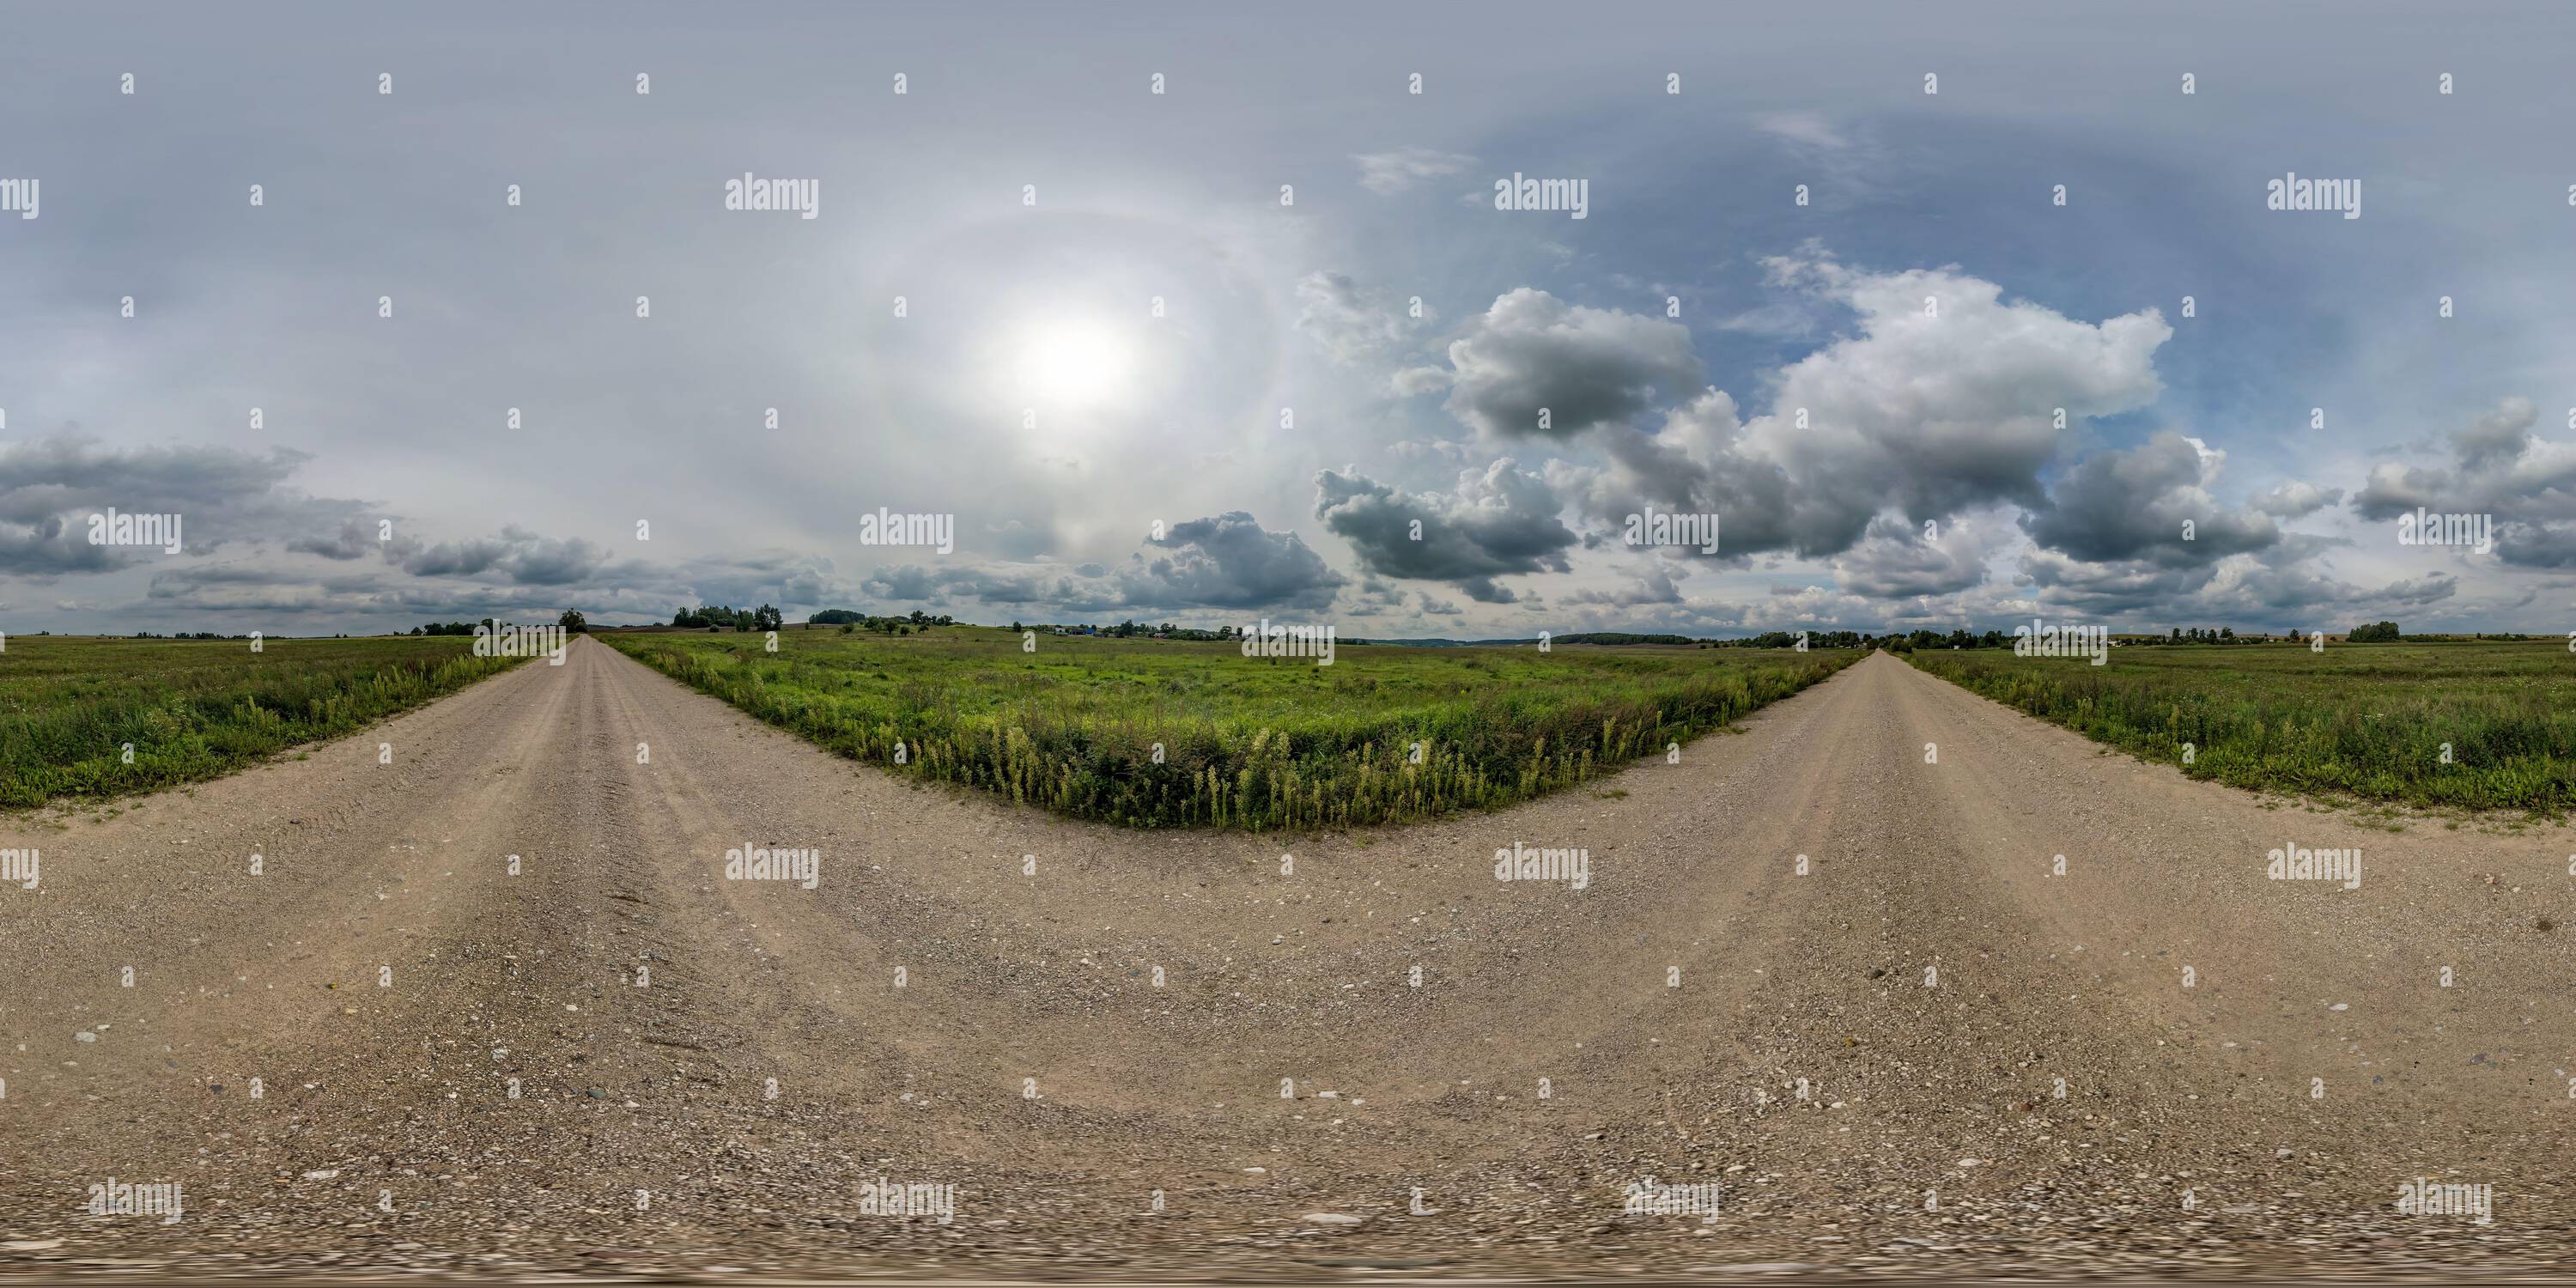 360 degree panoramic view of 360 hdr panorama on no traffic yellow sand gravel road among fields with overcast sky with white clouds and halo in equirectangular spherical projecti